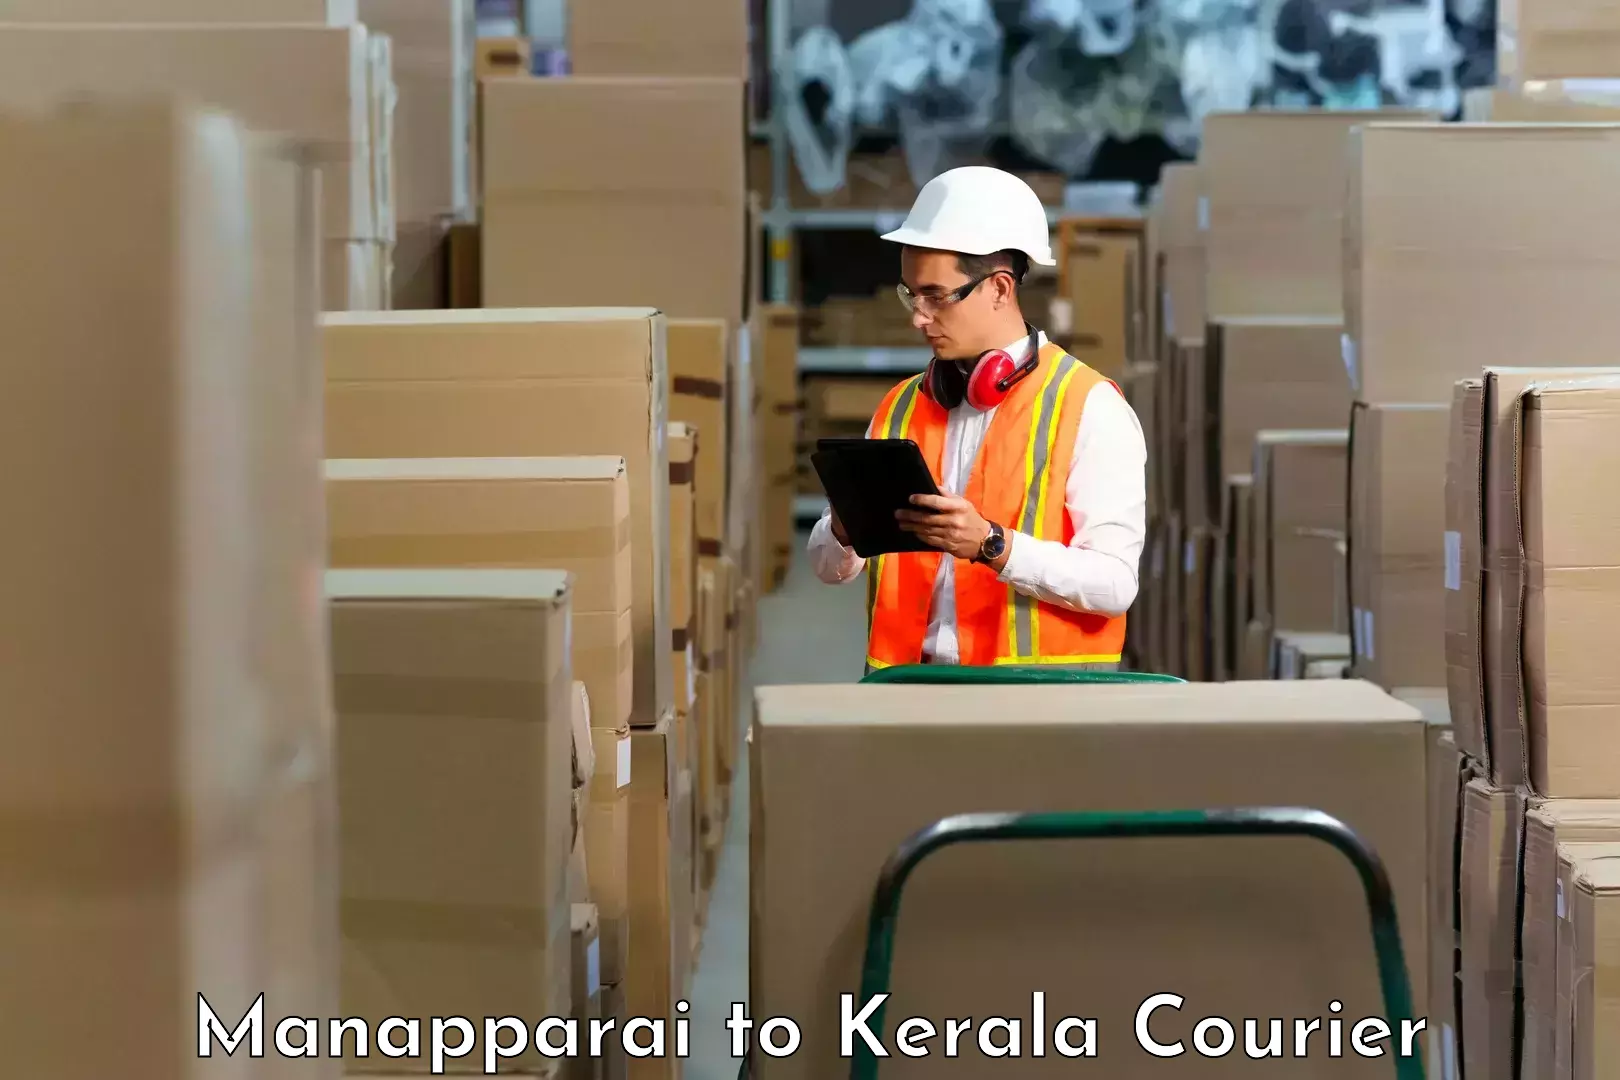 Reliable parcel services in Manapparai to Pala